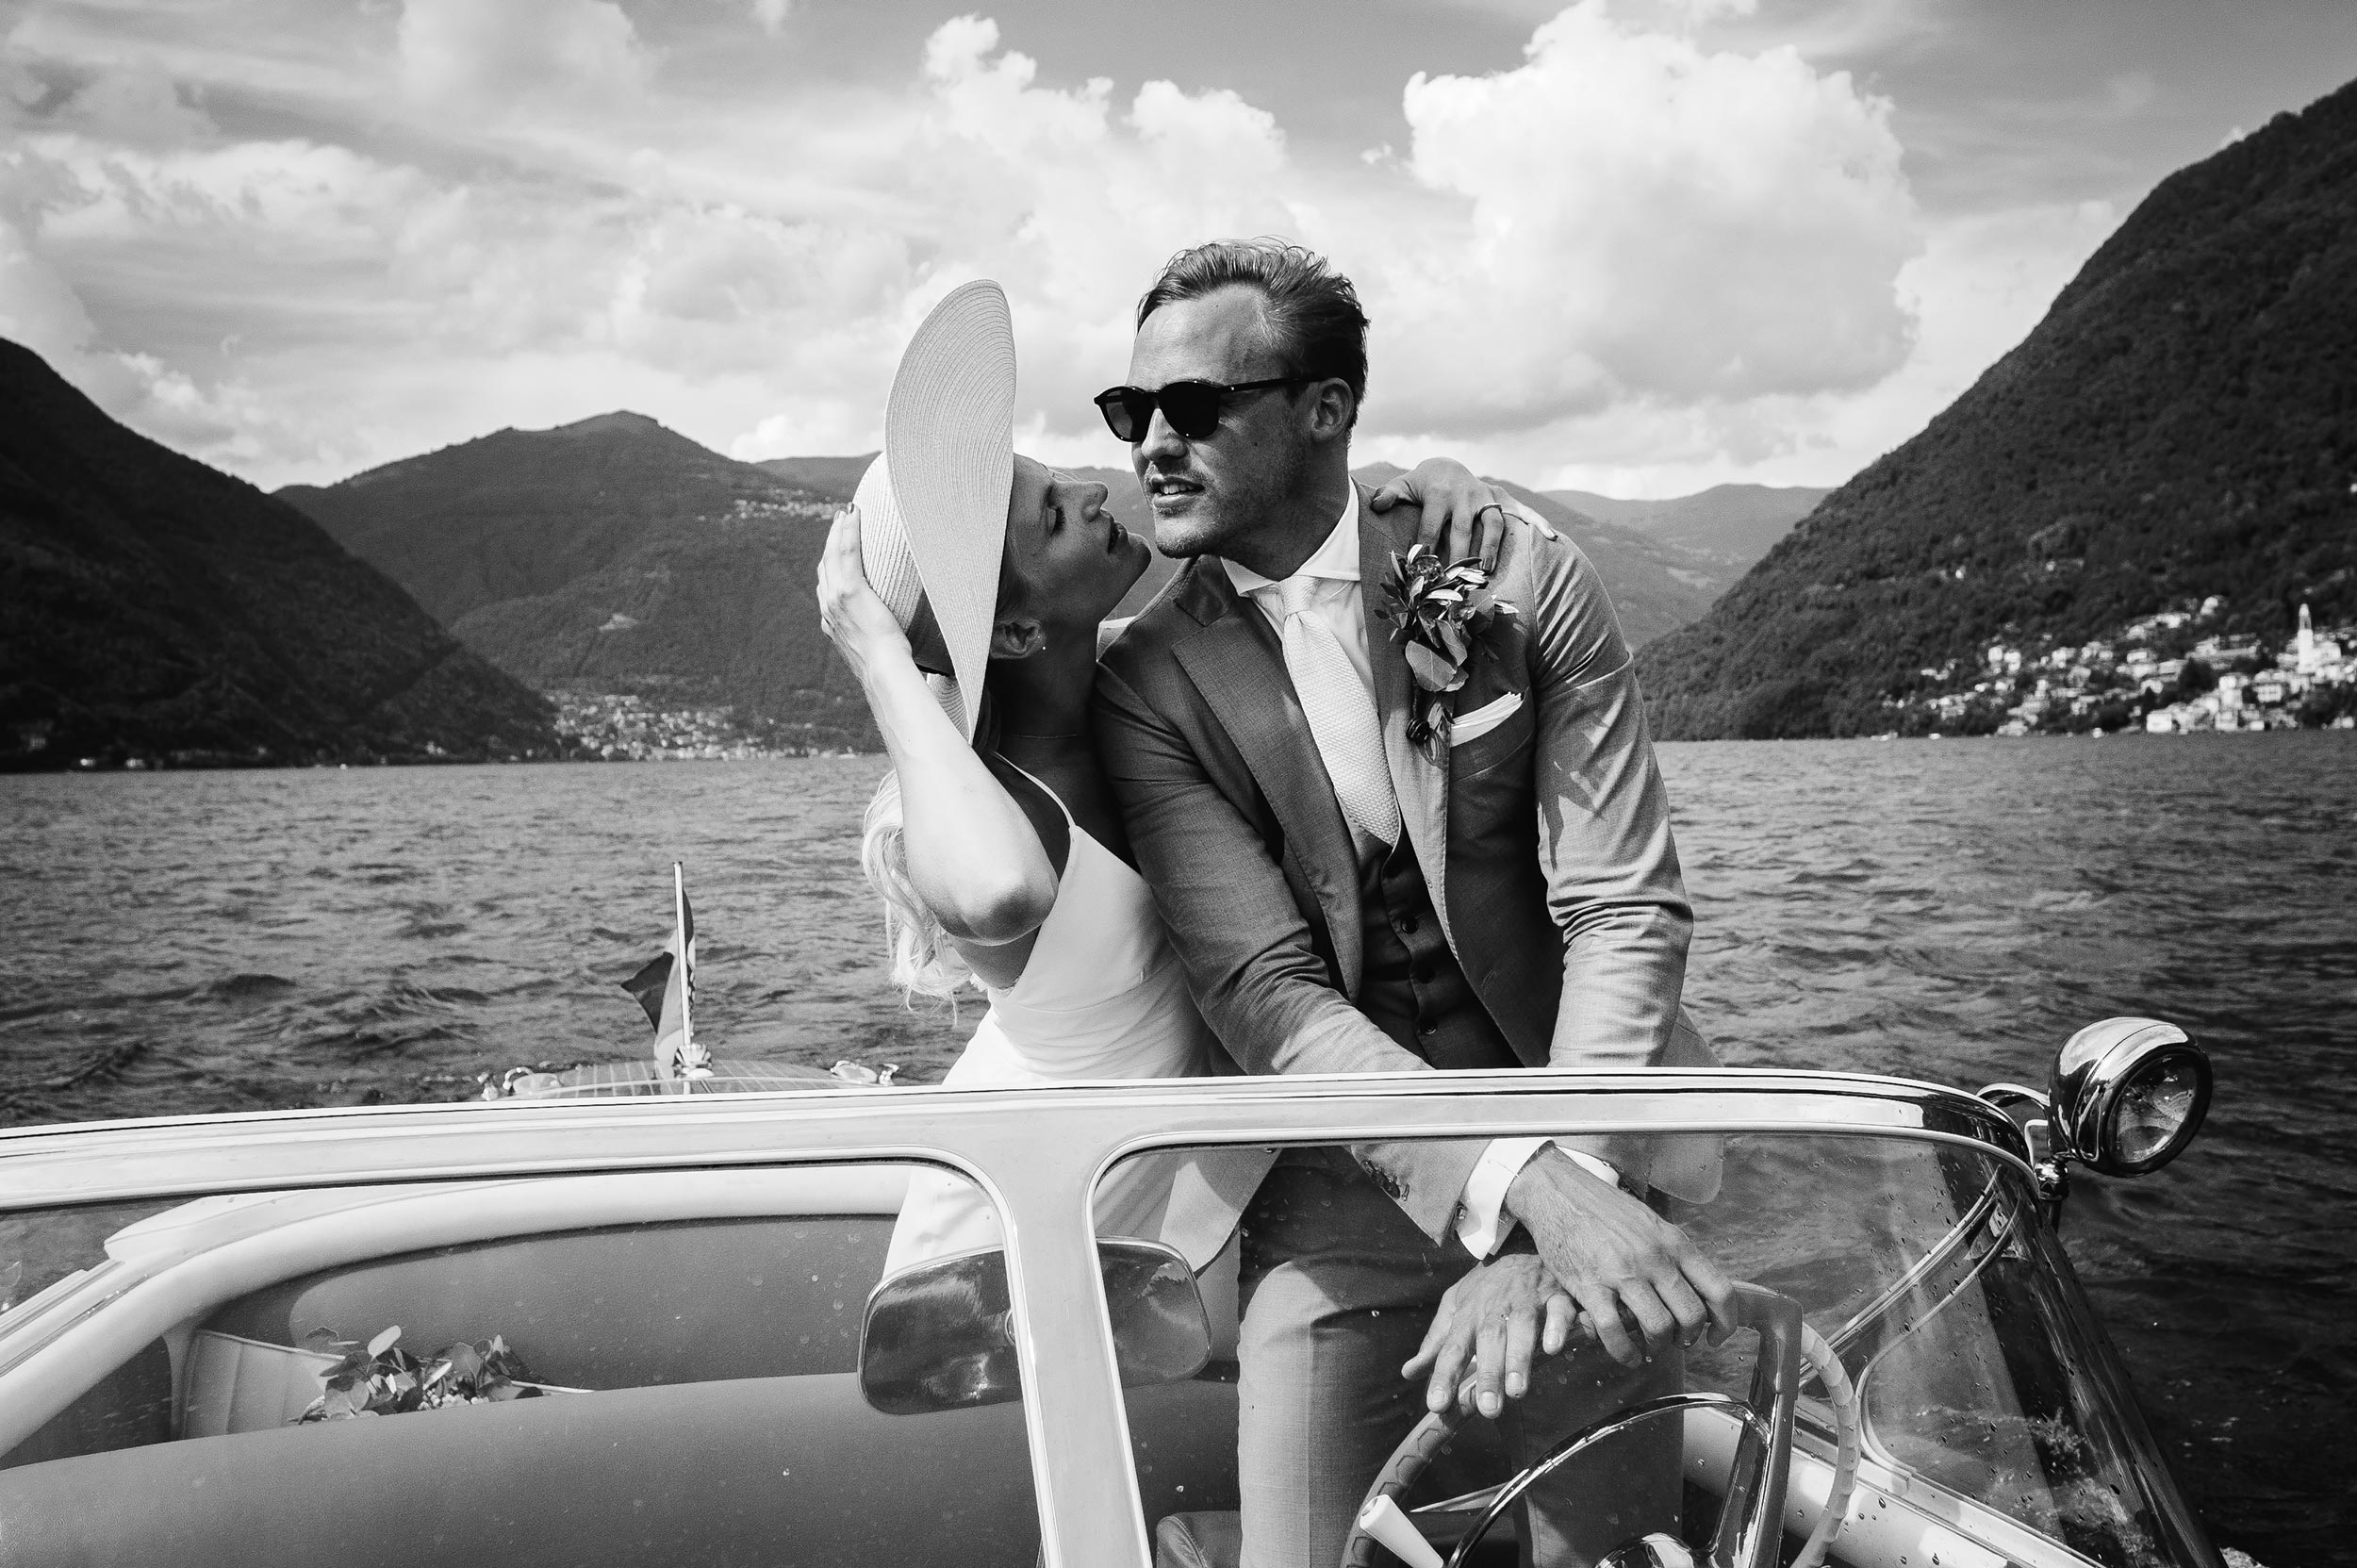 lake-como-wedding-photographer-Alessandro-Avenali-bride-and-groom-driving-riva-yacht-motorboat-black-and-white.jpg